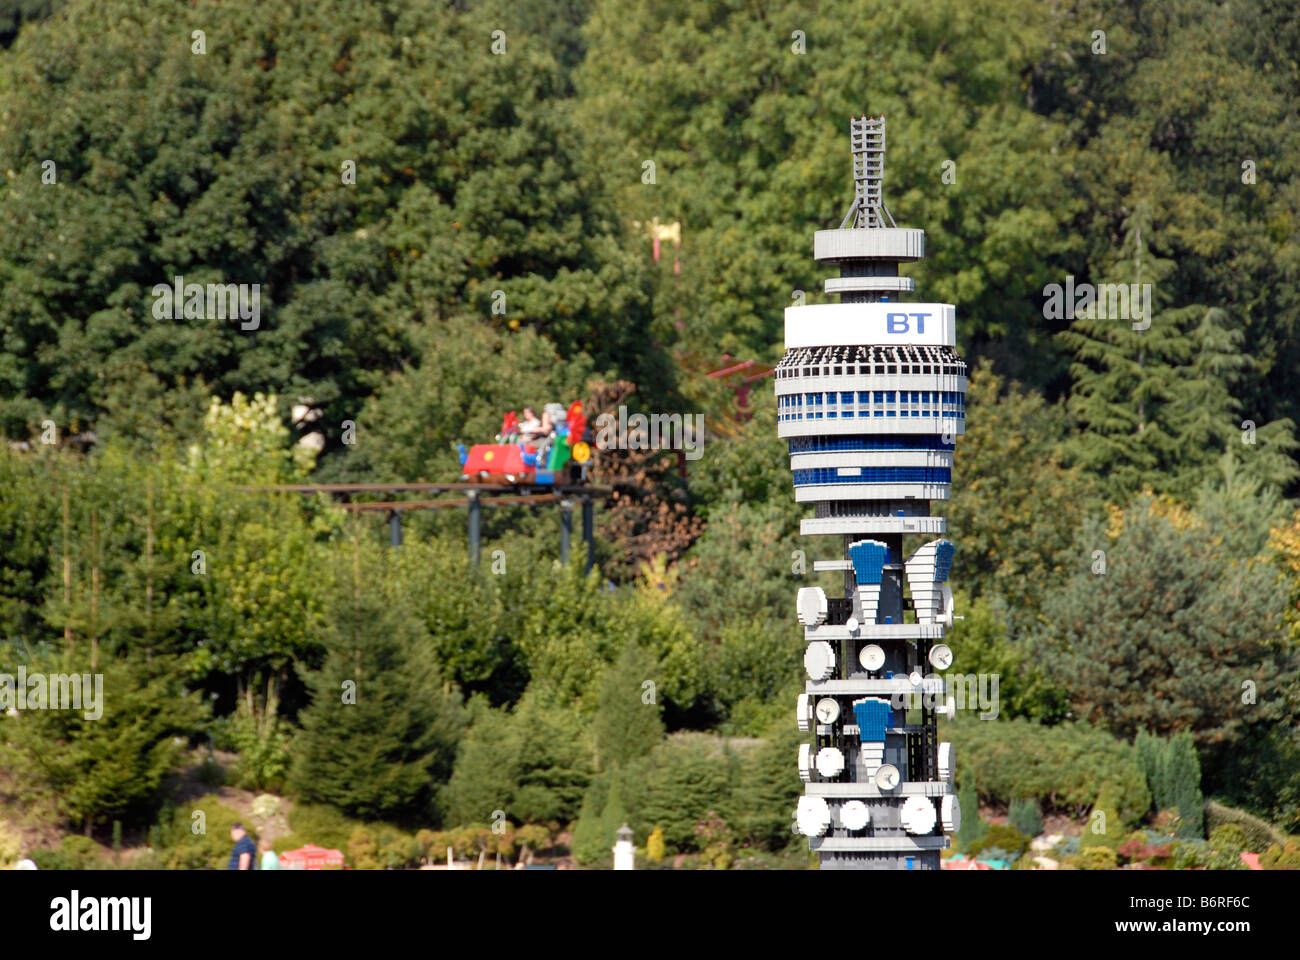 View of Miniland showing model of the BT Tower built with millions of Lego bricks at Legoland Windsor UK Stock Photo